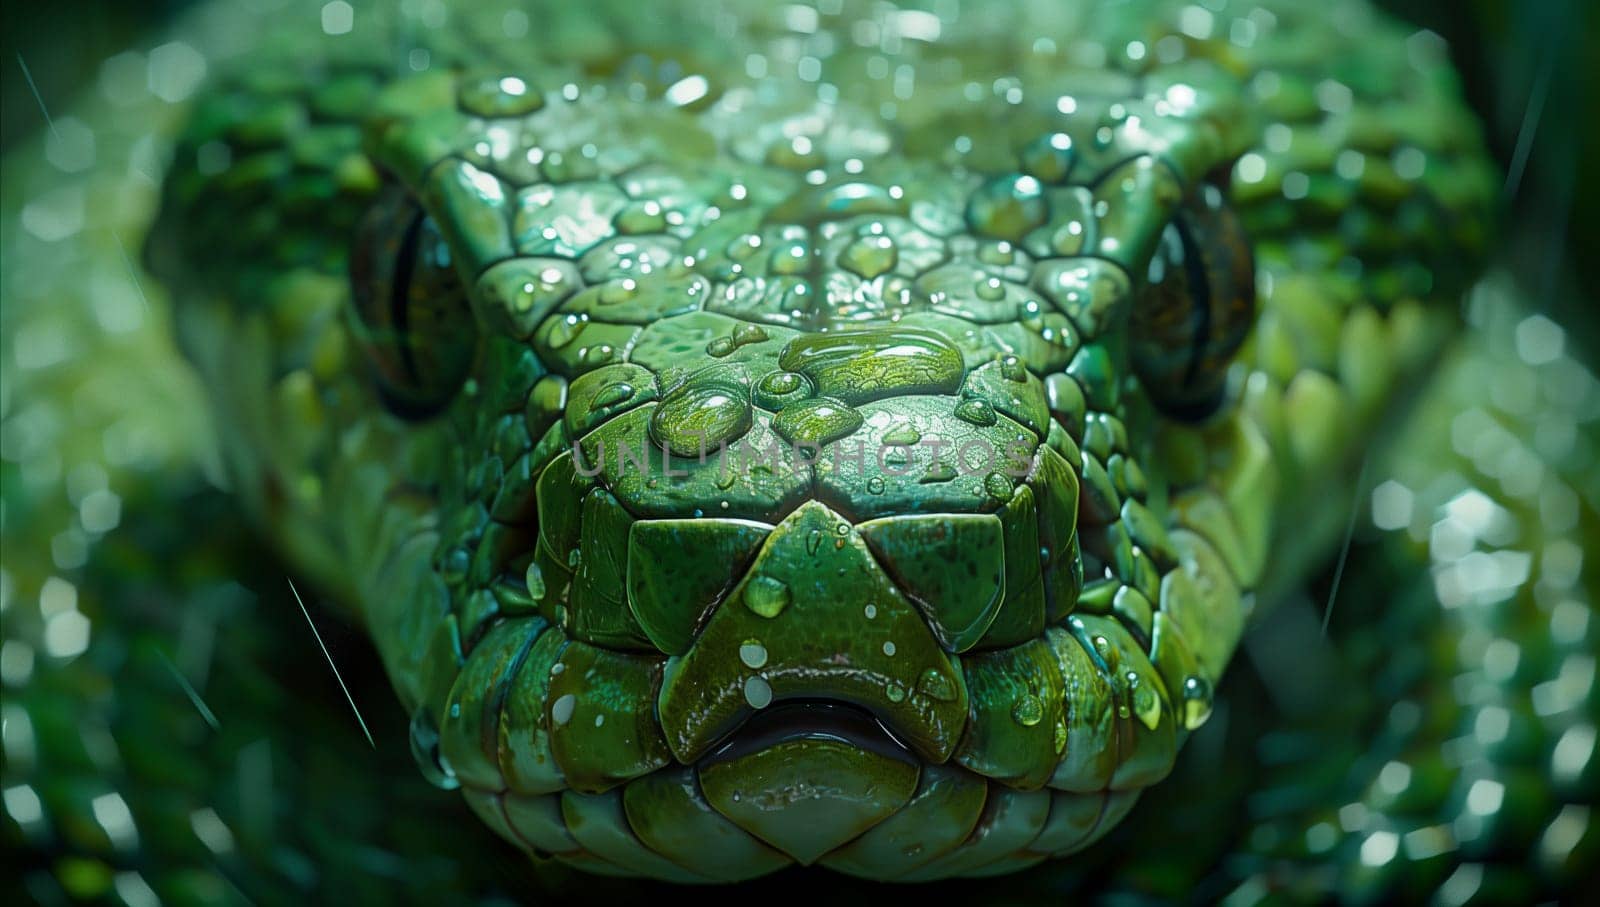 Macro photo of a green snakes face with water drops in a jungle setting by richwolf